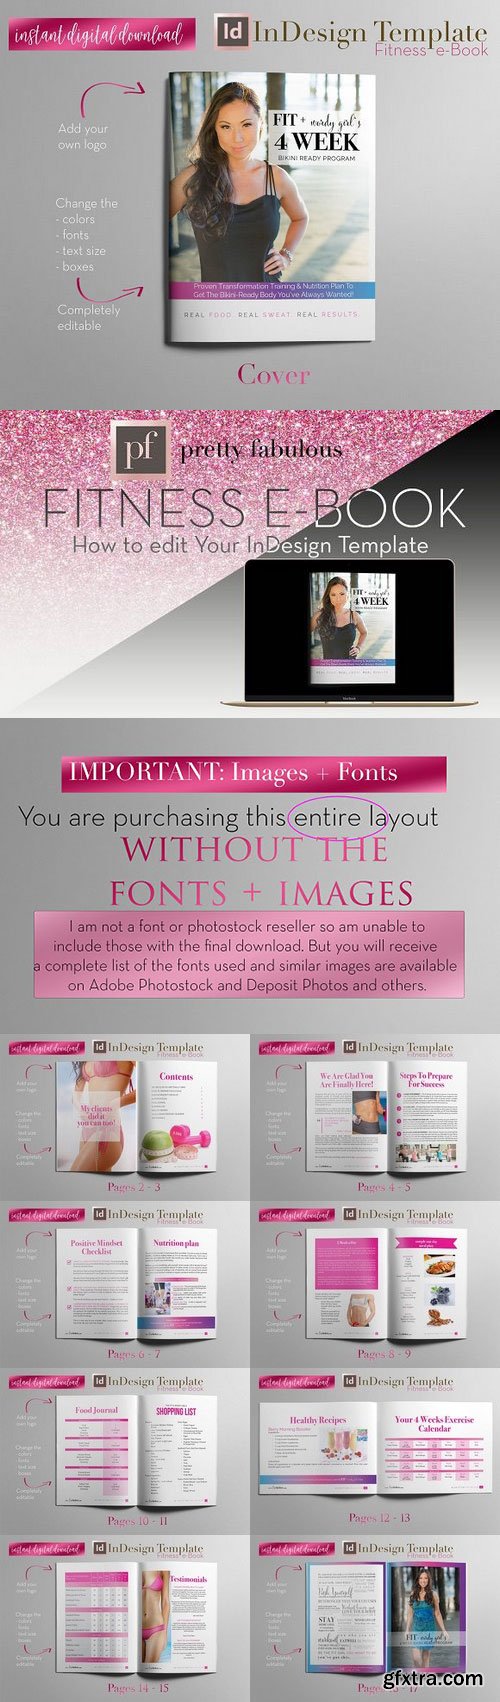 CM - Fitness e-Book | InDesign Template 1154742